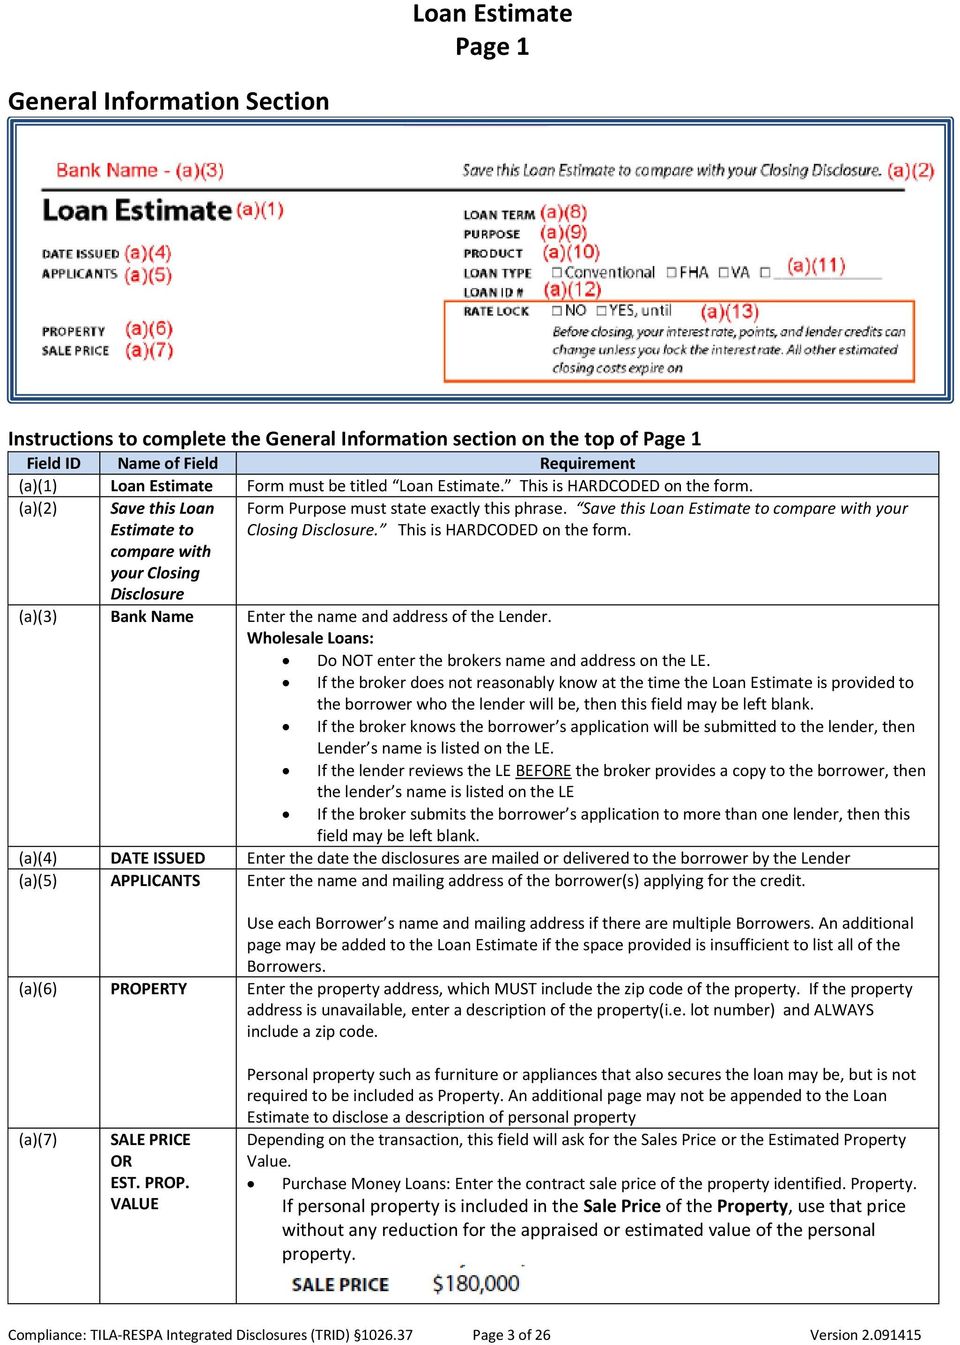 This is HARDCODED on the form. compare with your Closing Disclosure (a)(3) Bank Name Enter the name and address of the Lender. Wholesale Loans: Do NOT enter the brokers name and address on the LE.